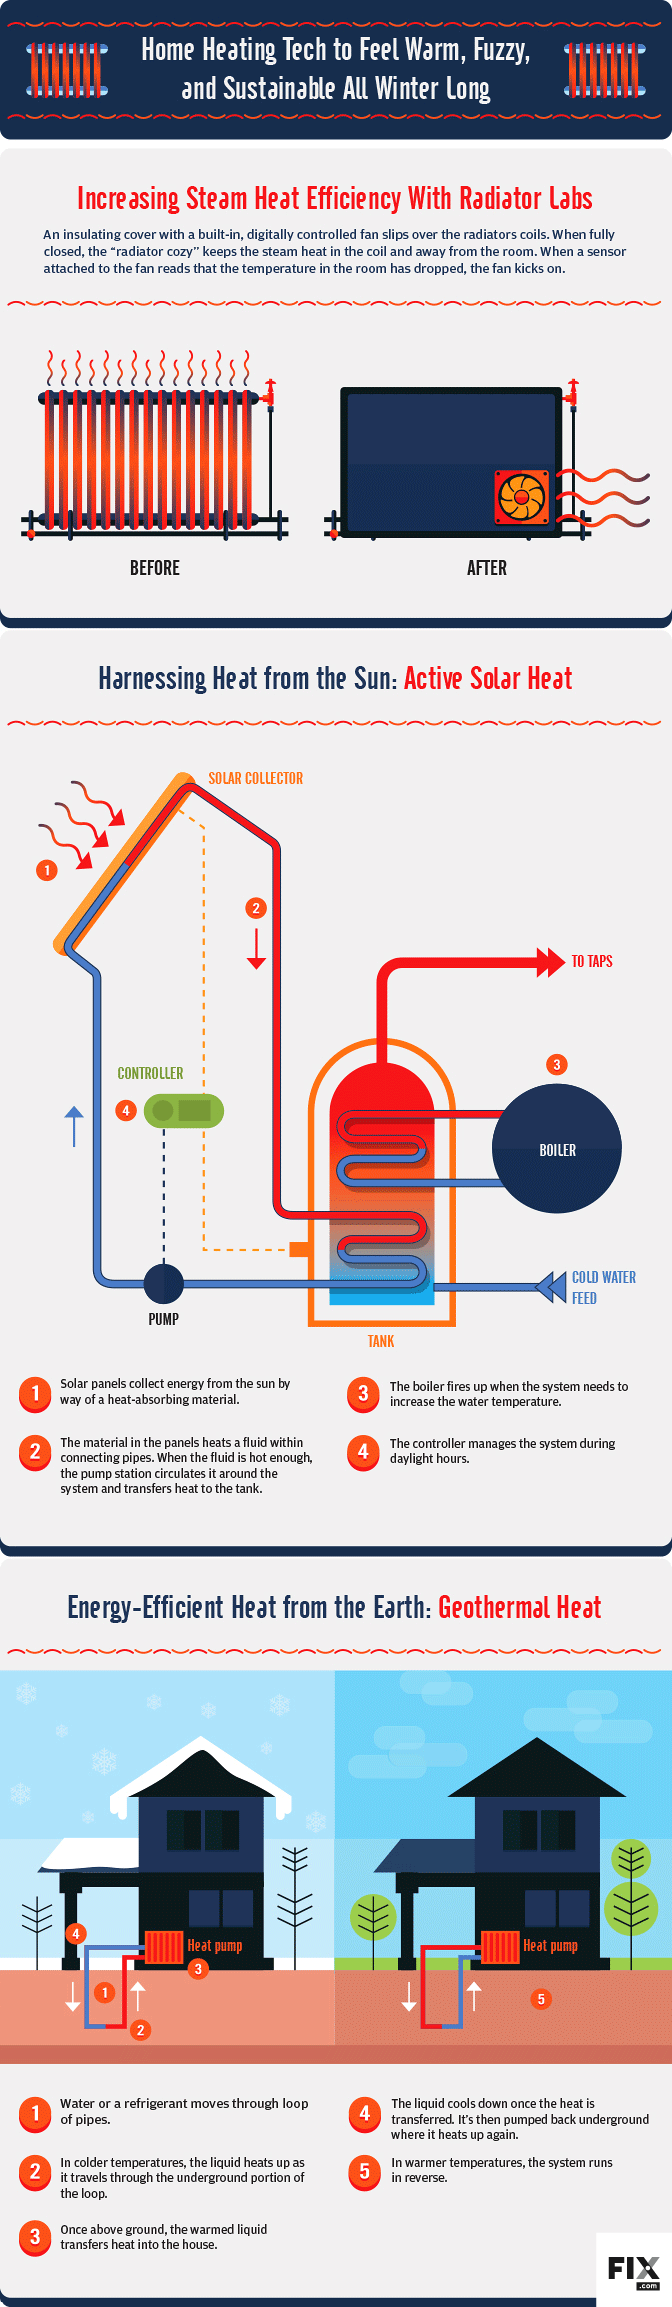 How energy efficient is a steam heating system?